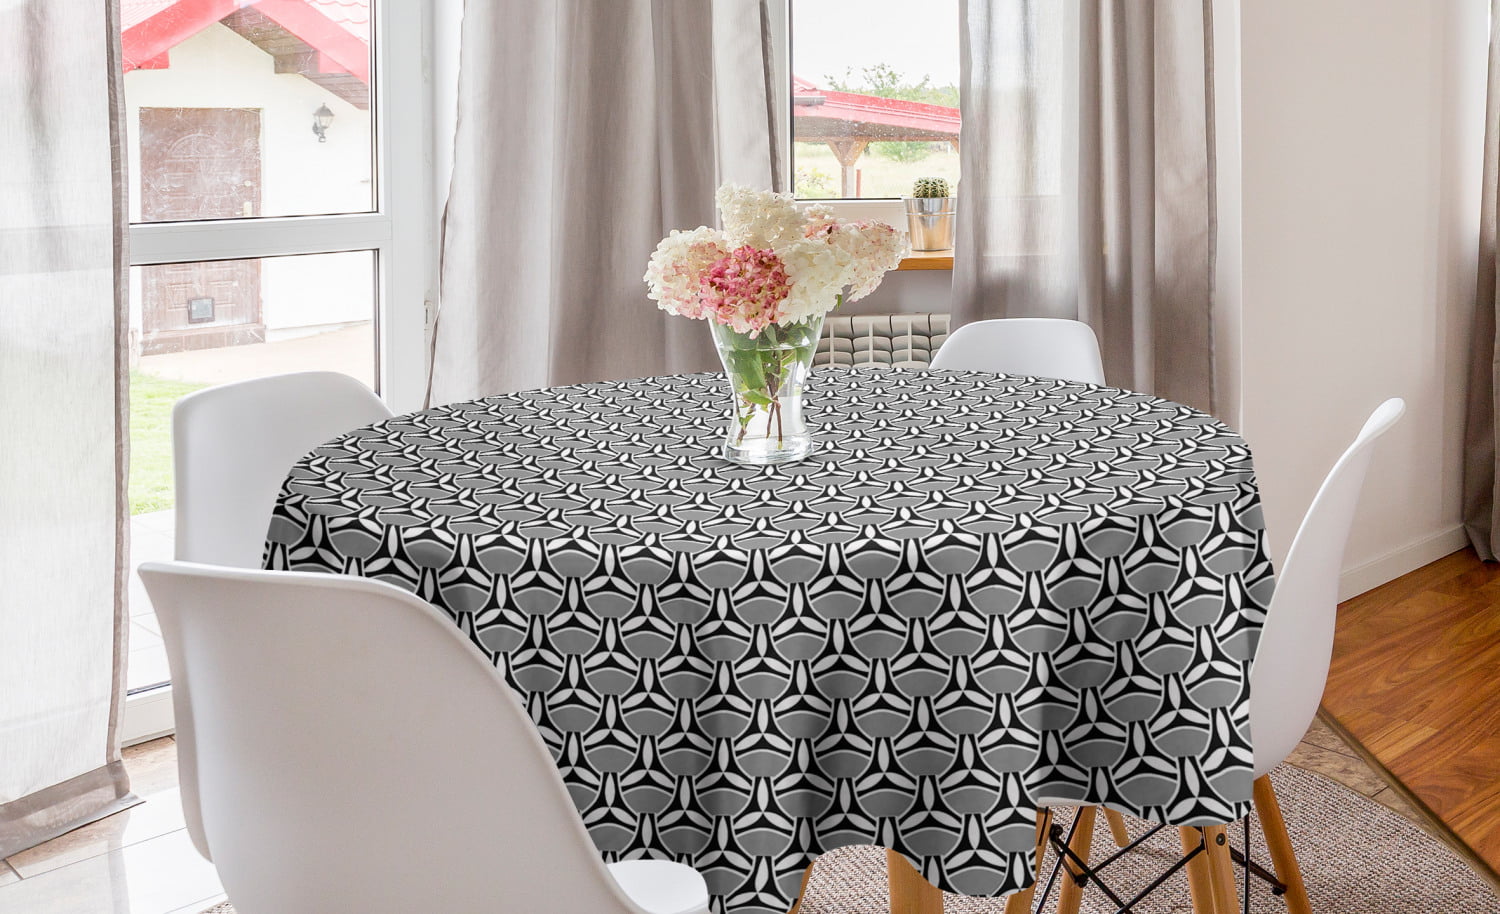 Romanti Rectangle Tablecloth Abstract Black and White Marble Table Cloth 60 x 108 Inch Vinyl Fabric Picnic Table Cover for Outdoor Camping Desk Cover Party Decor